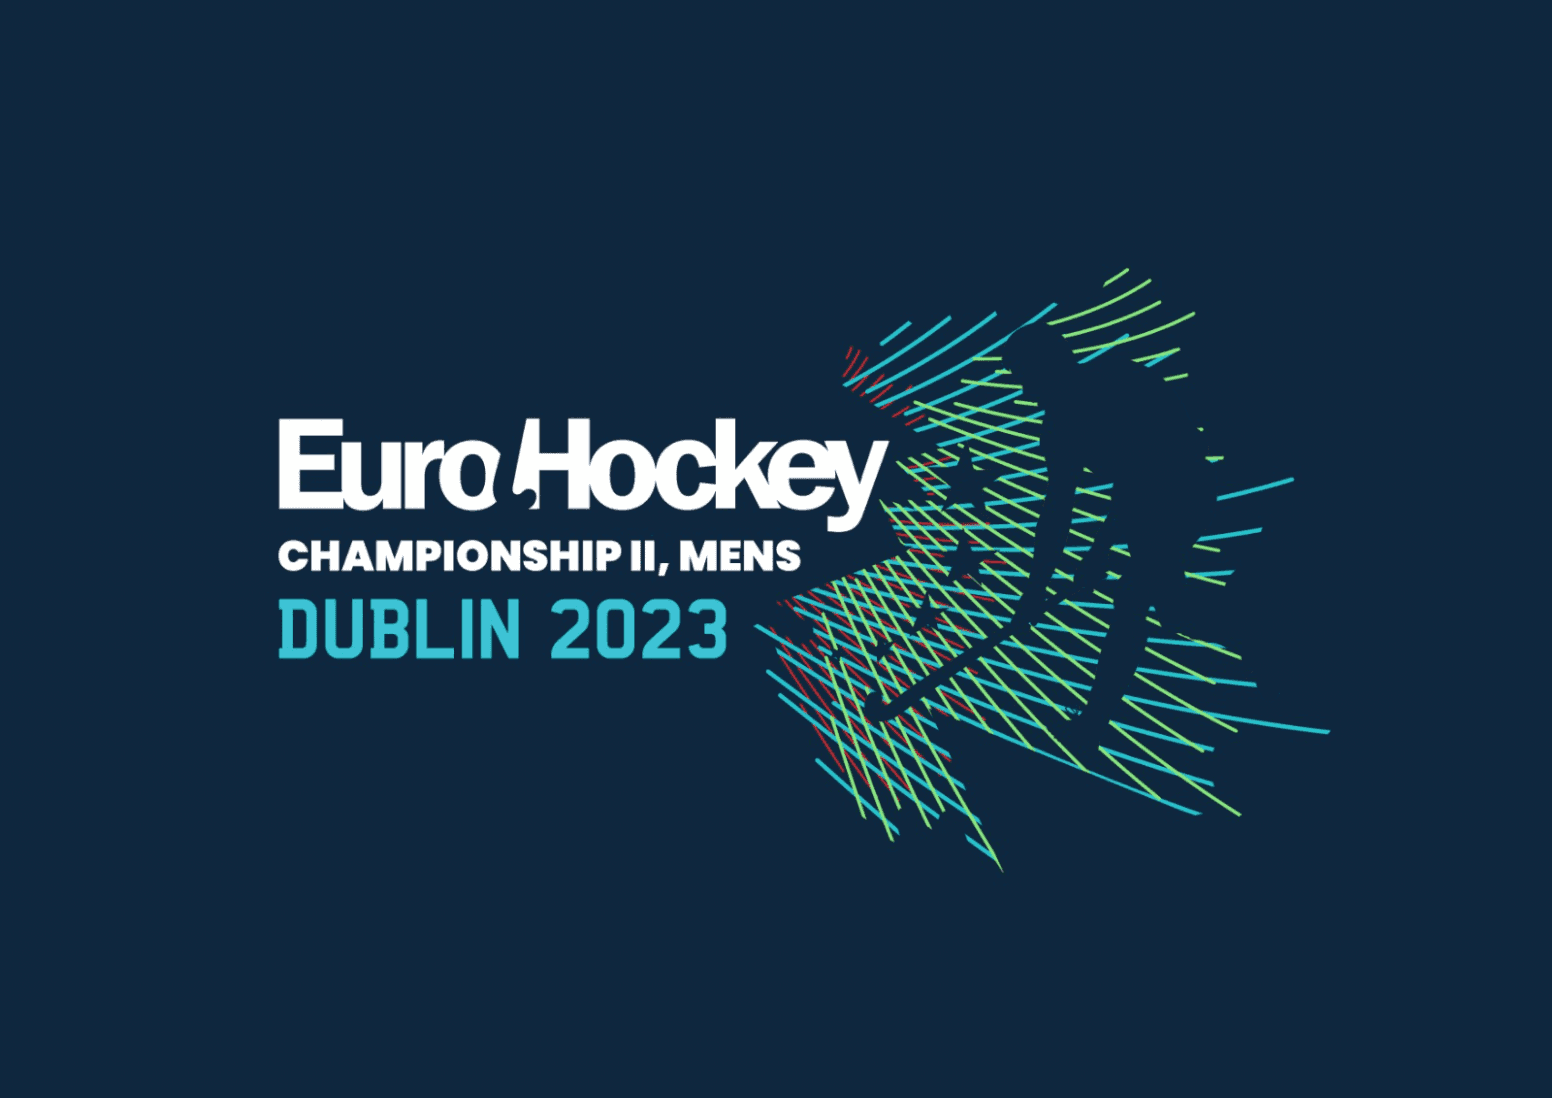 Two Olympic qualifier spots on the line at men’s Championship II in Dublin